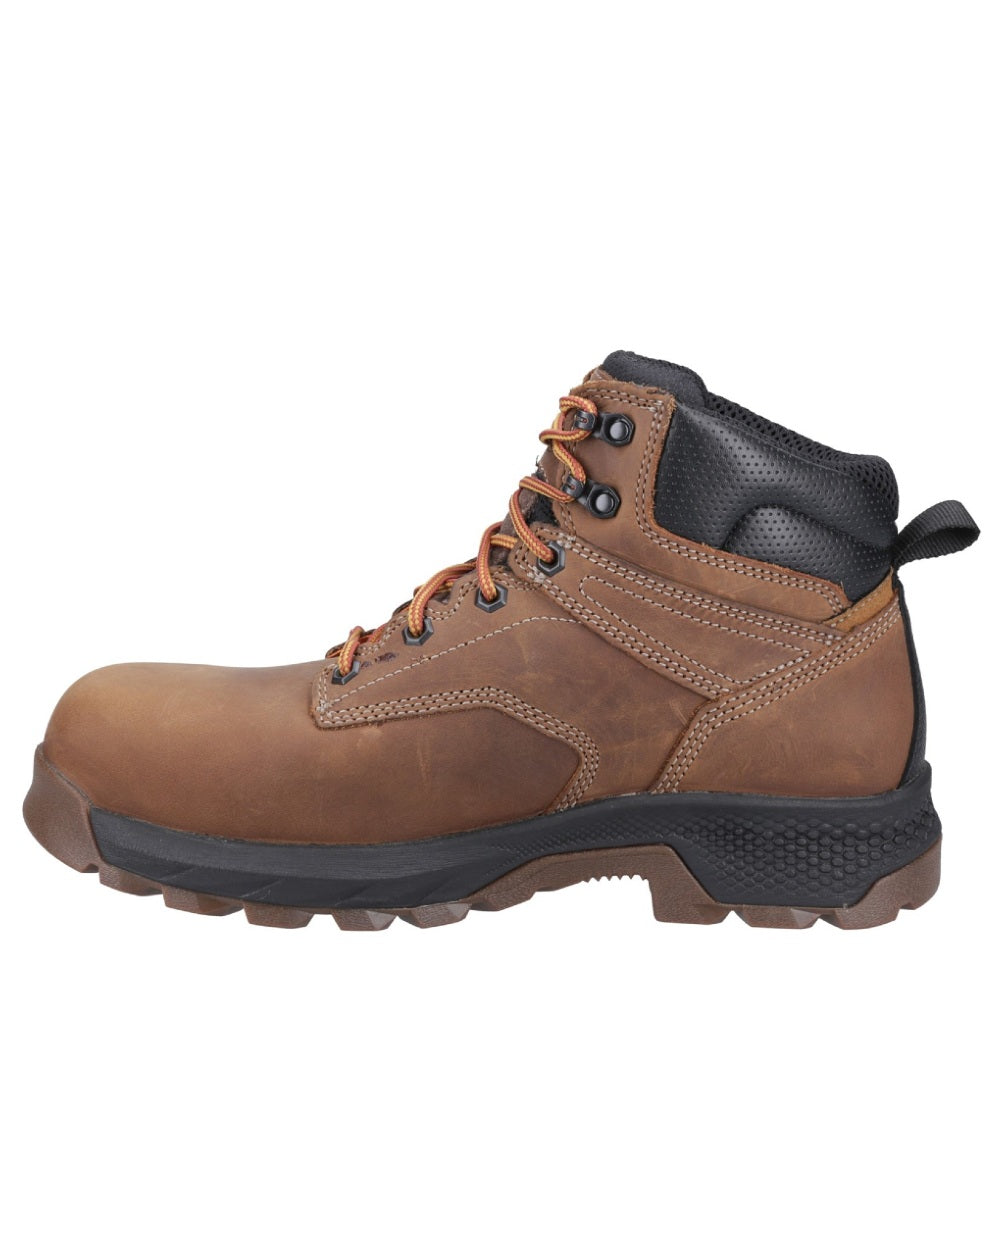 Brown coloured Timberland Pro Titan 6inch Safety Boots on white background 